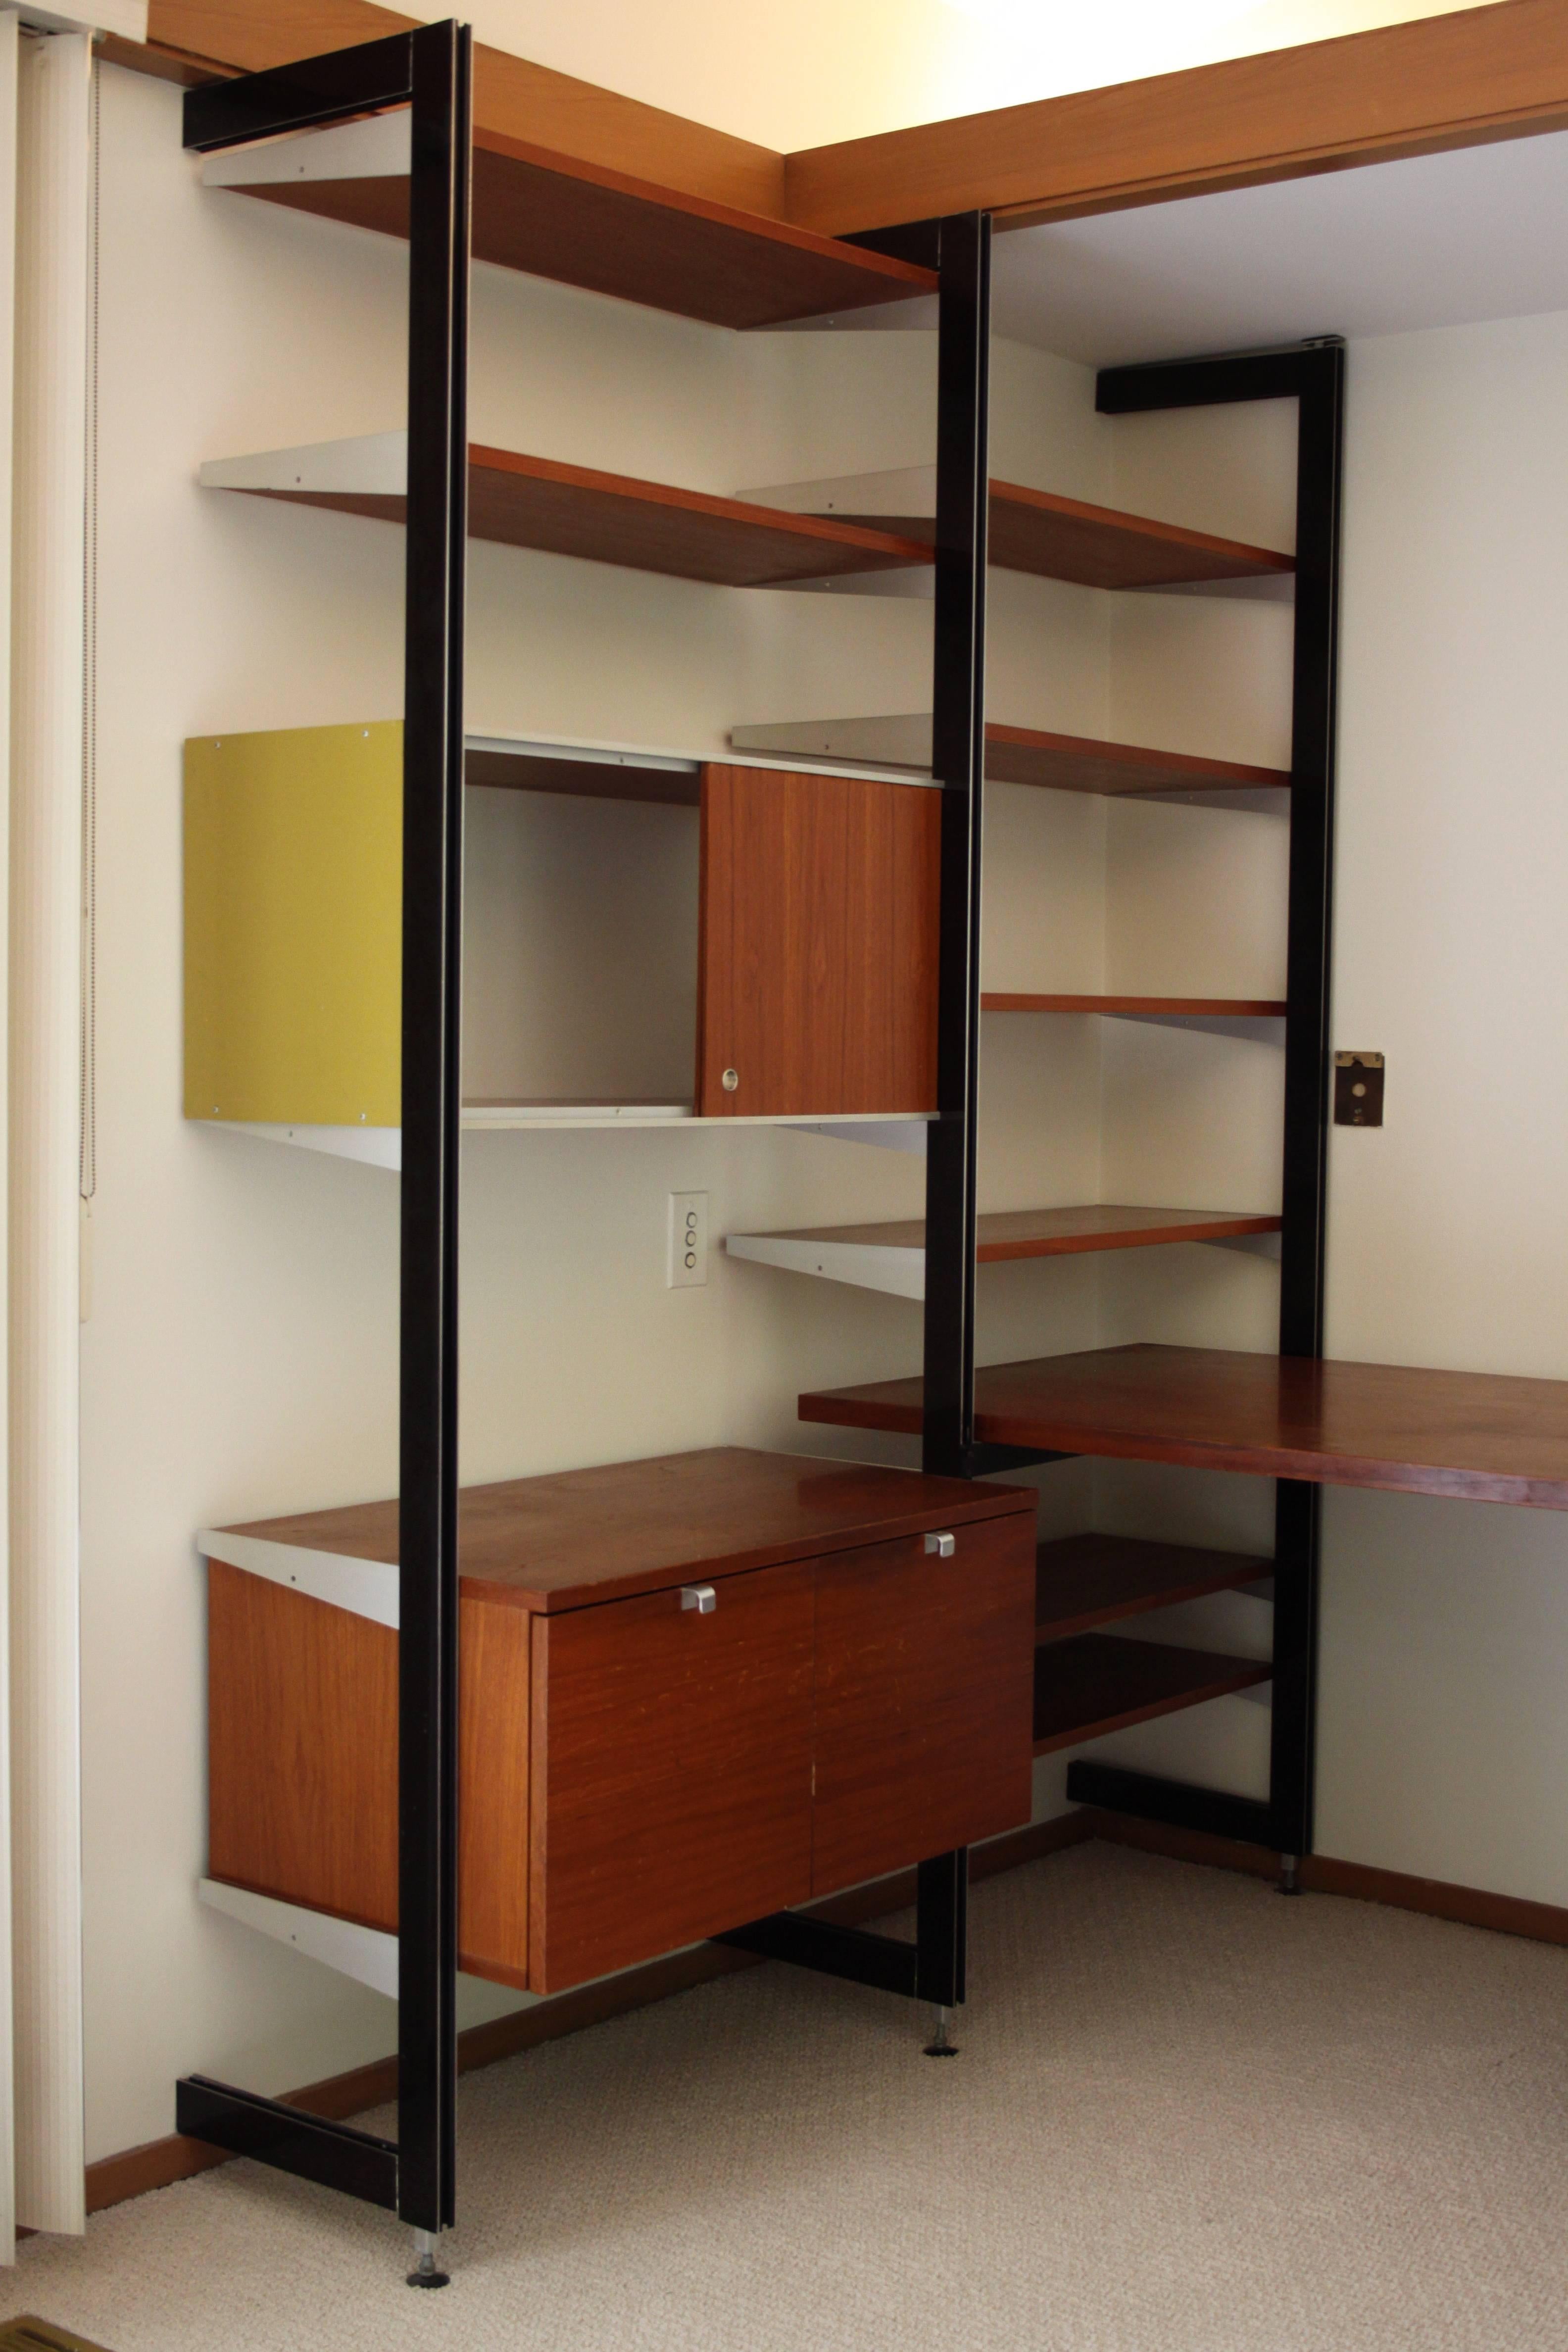 George Nelson for Herman Miller comprehensive storage system or CSS desk and wall unit combination. This unit comes with two file drawers, sliding storage area, three drawers that lock (original key), eight shelves and desk top. 
All components are